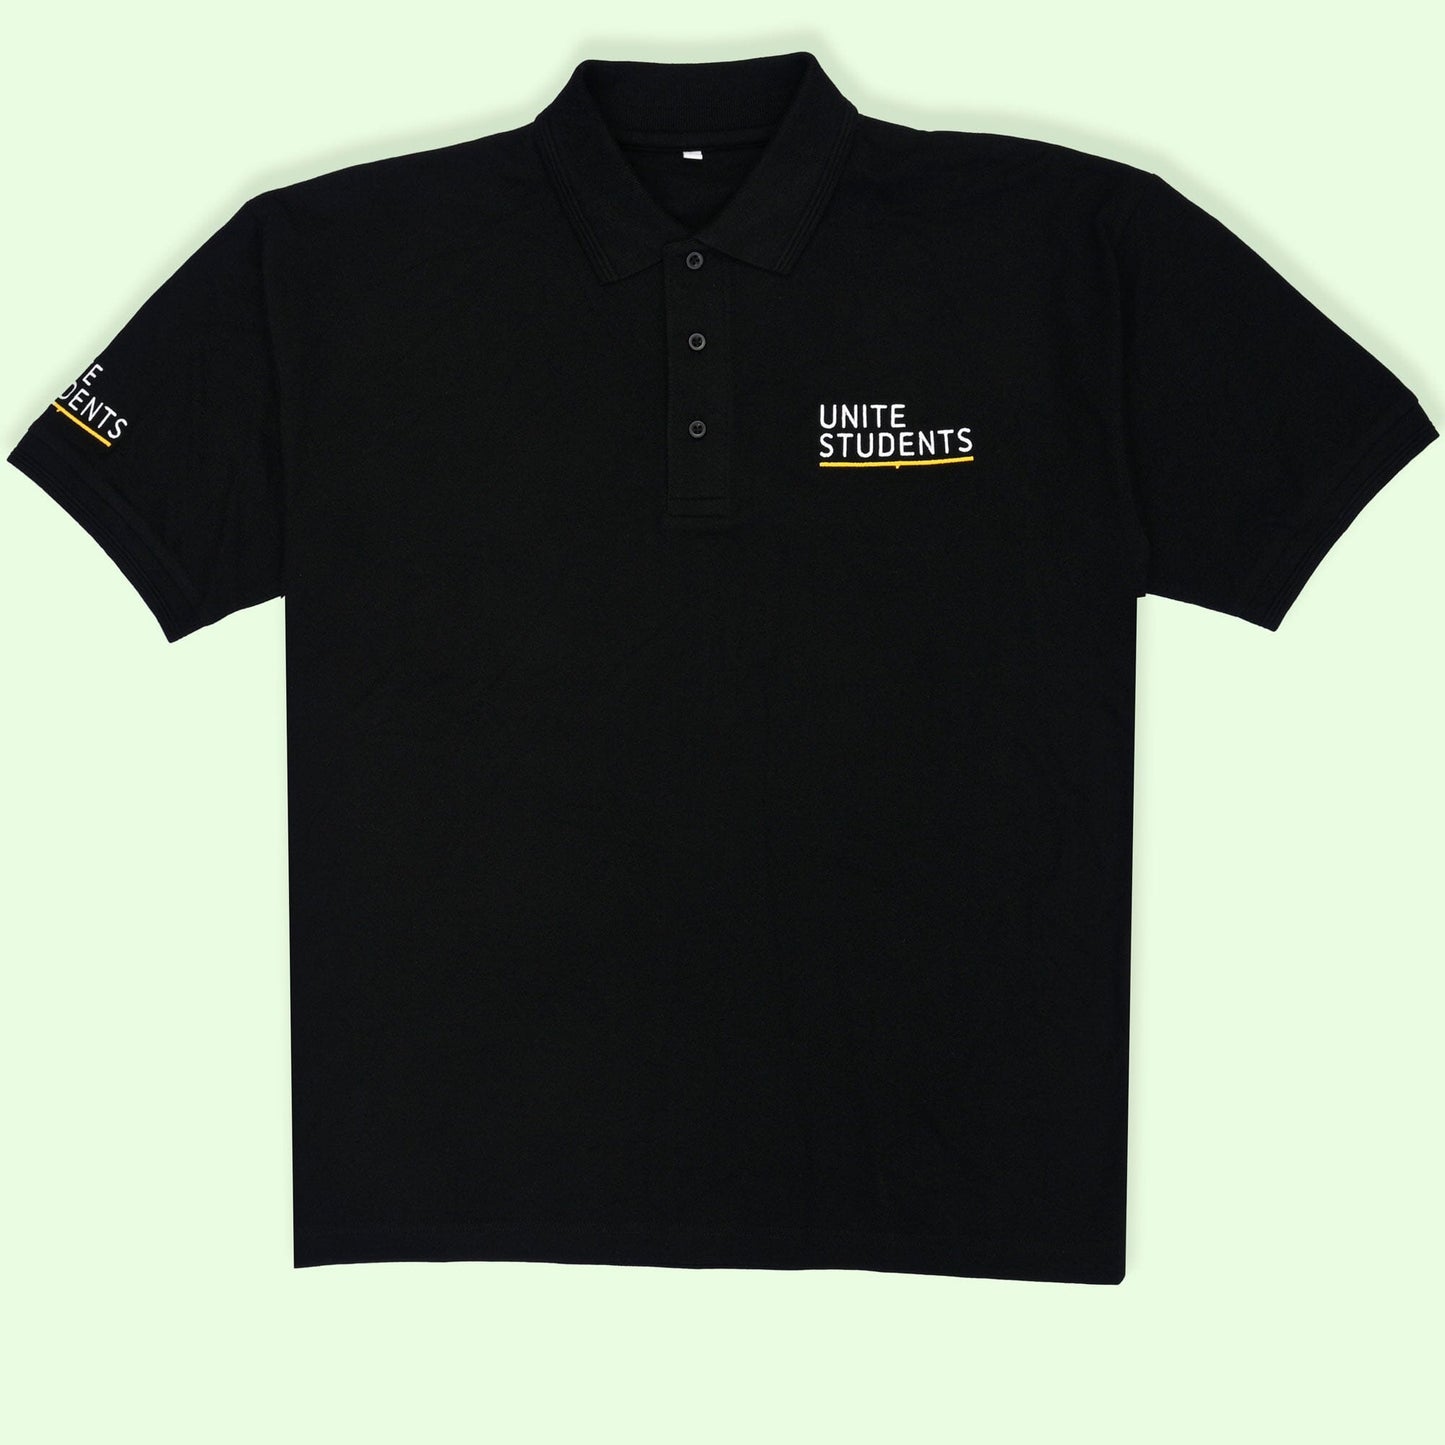 Men's United Students Embroidered Pique Polo Shirt Men's Polo Shirt ST Black S 